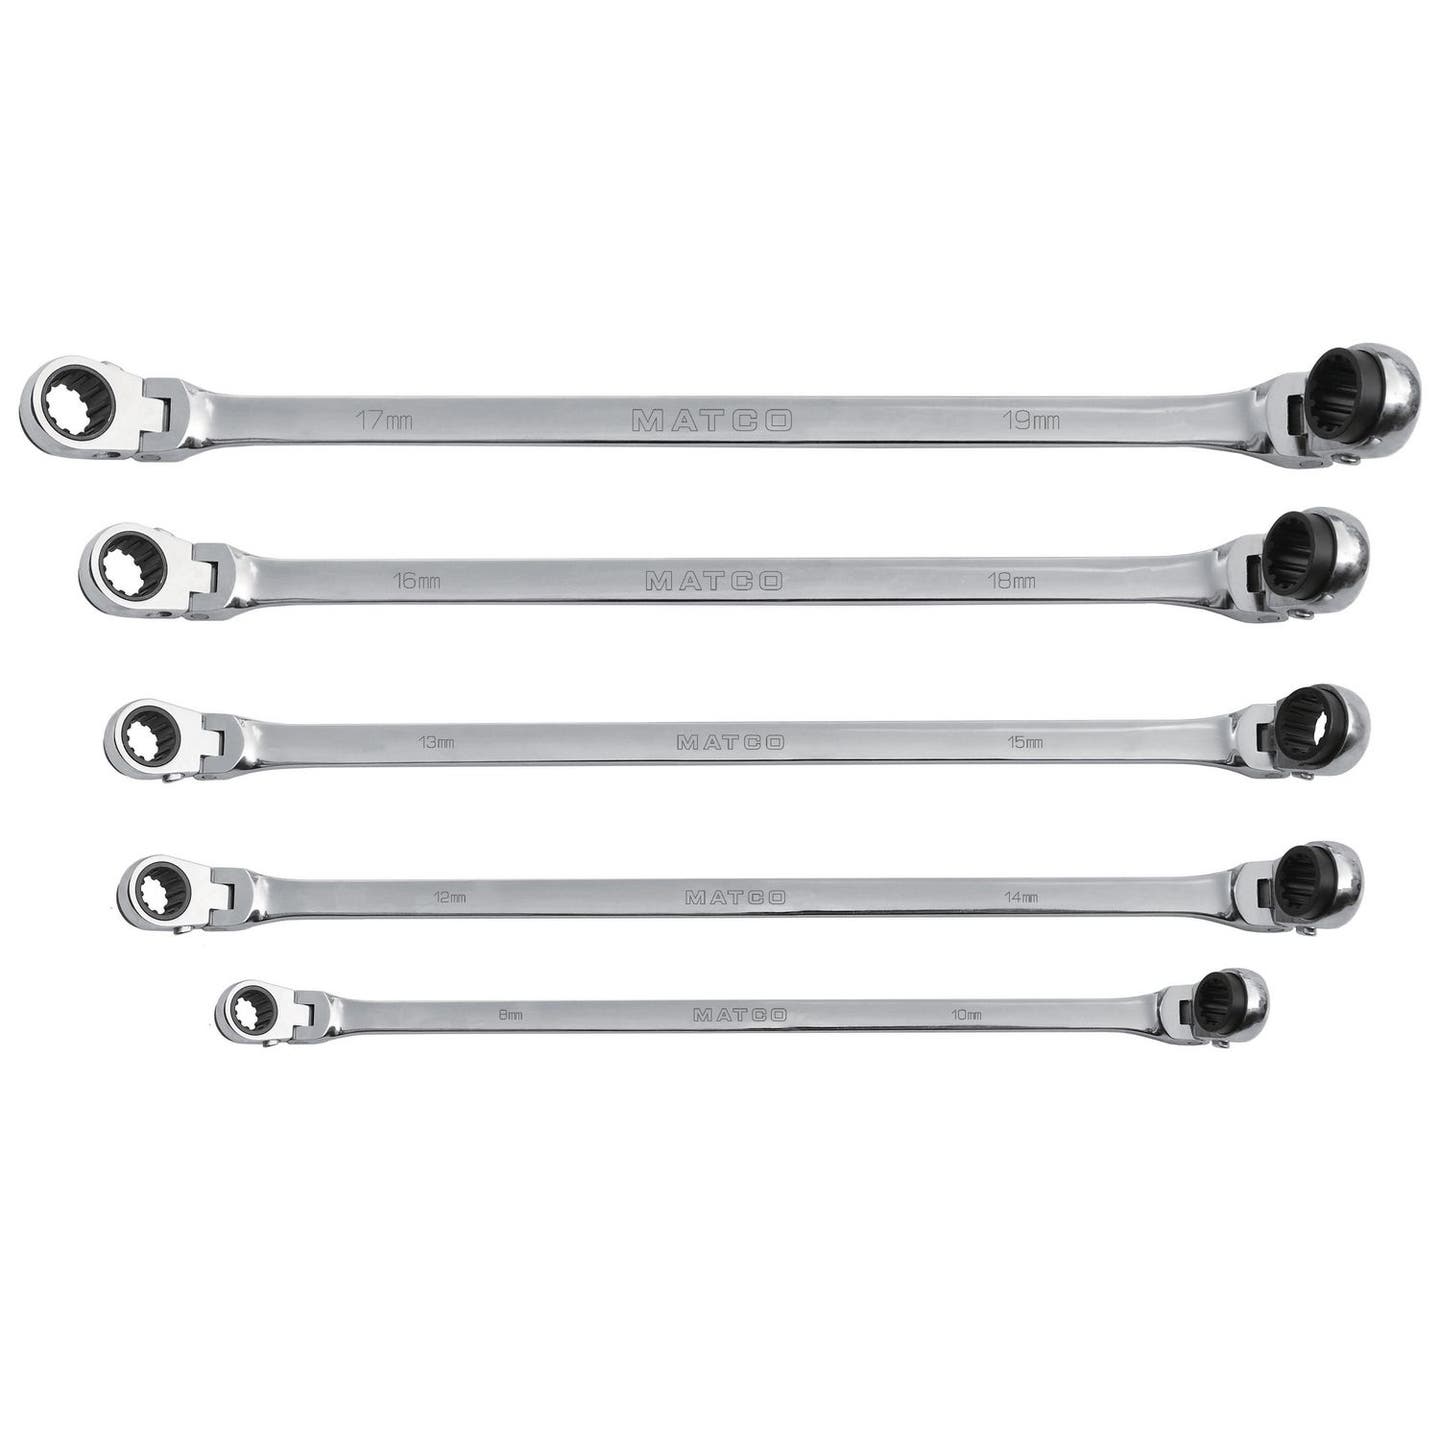 5 PIECE EXTRA LONG DOUBLE BOX FLEX HEAD RATCHETING WRENCH SET